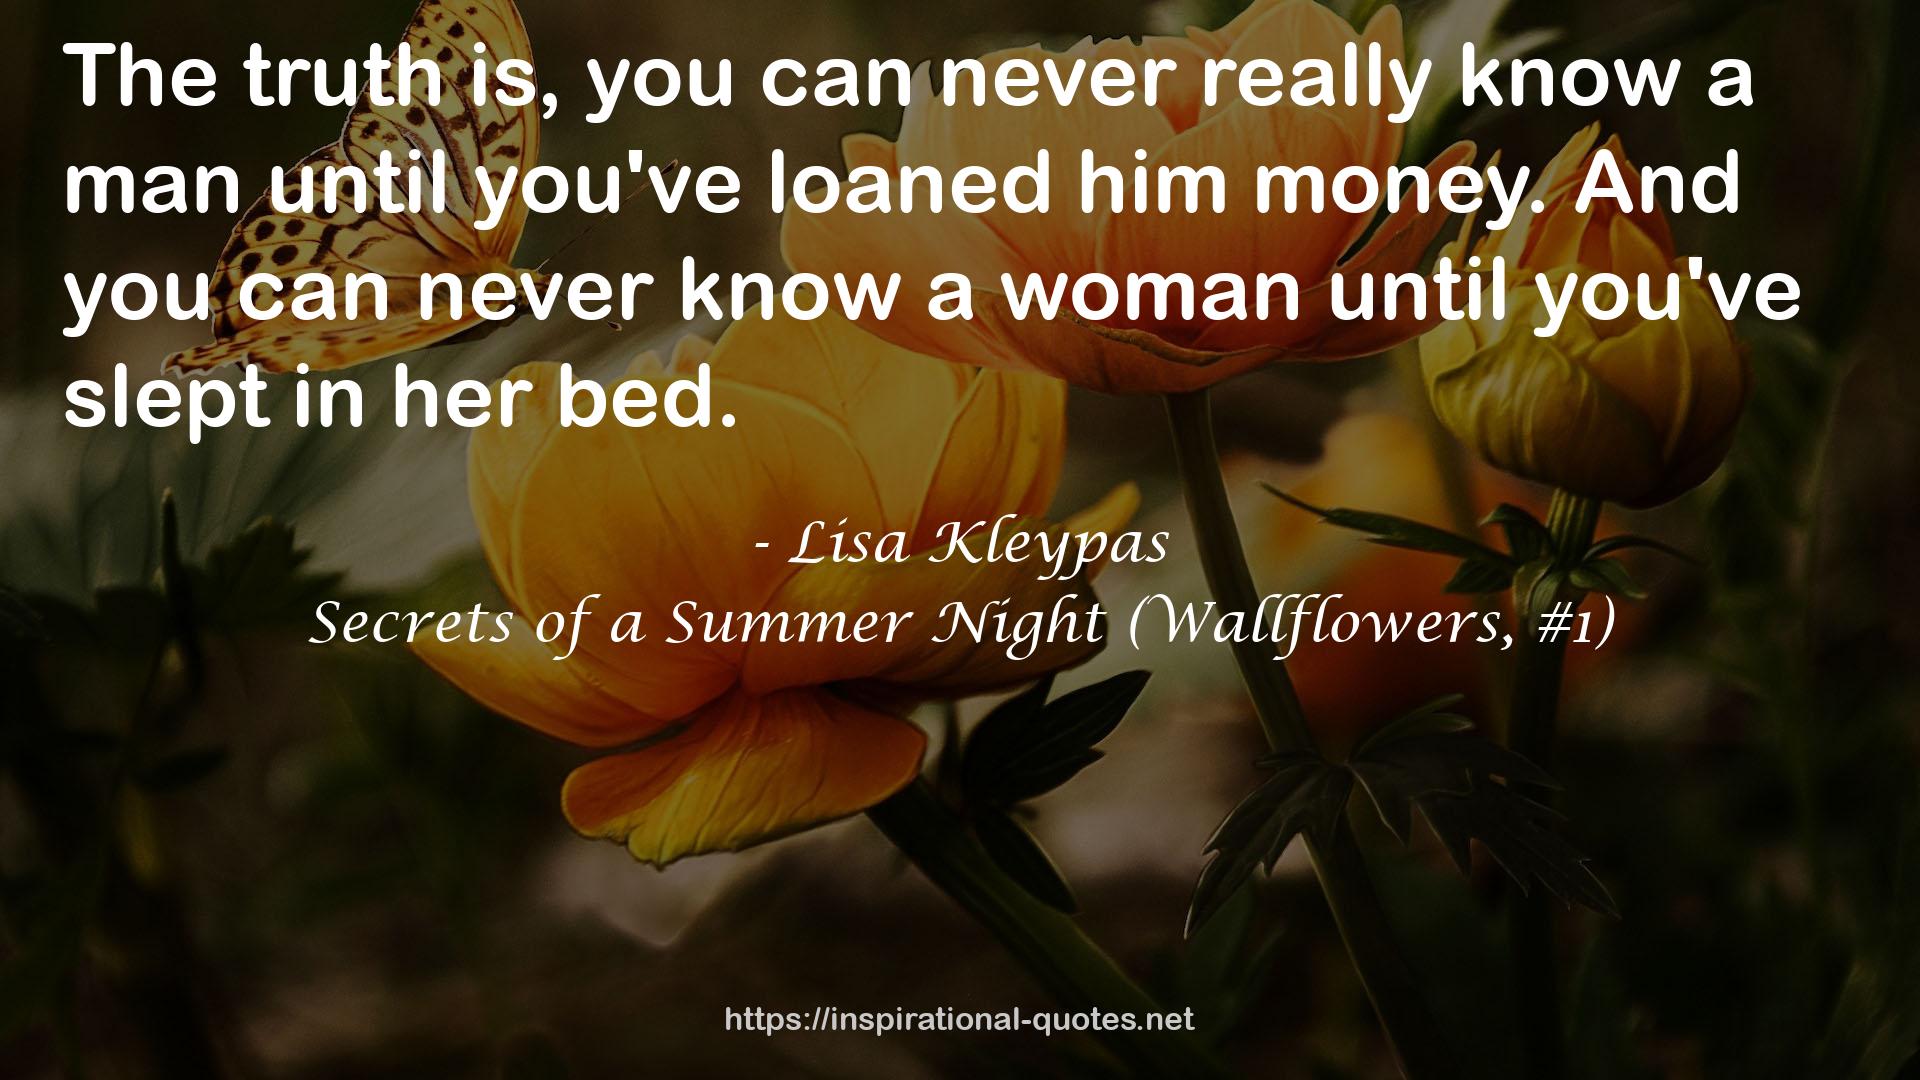 Lisa Kleypas QUOTES